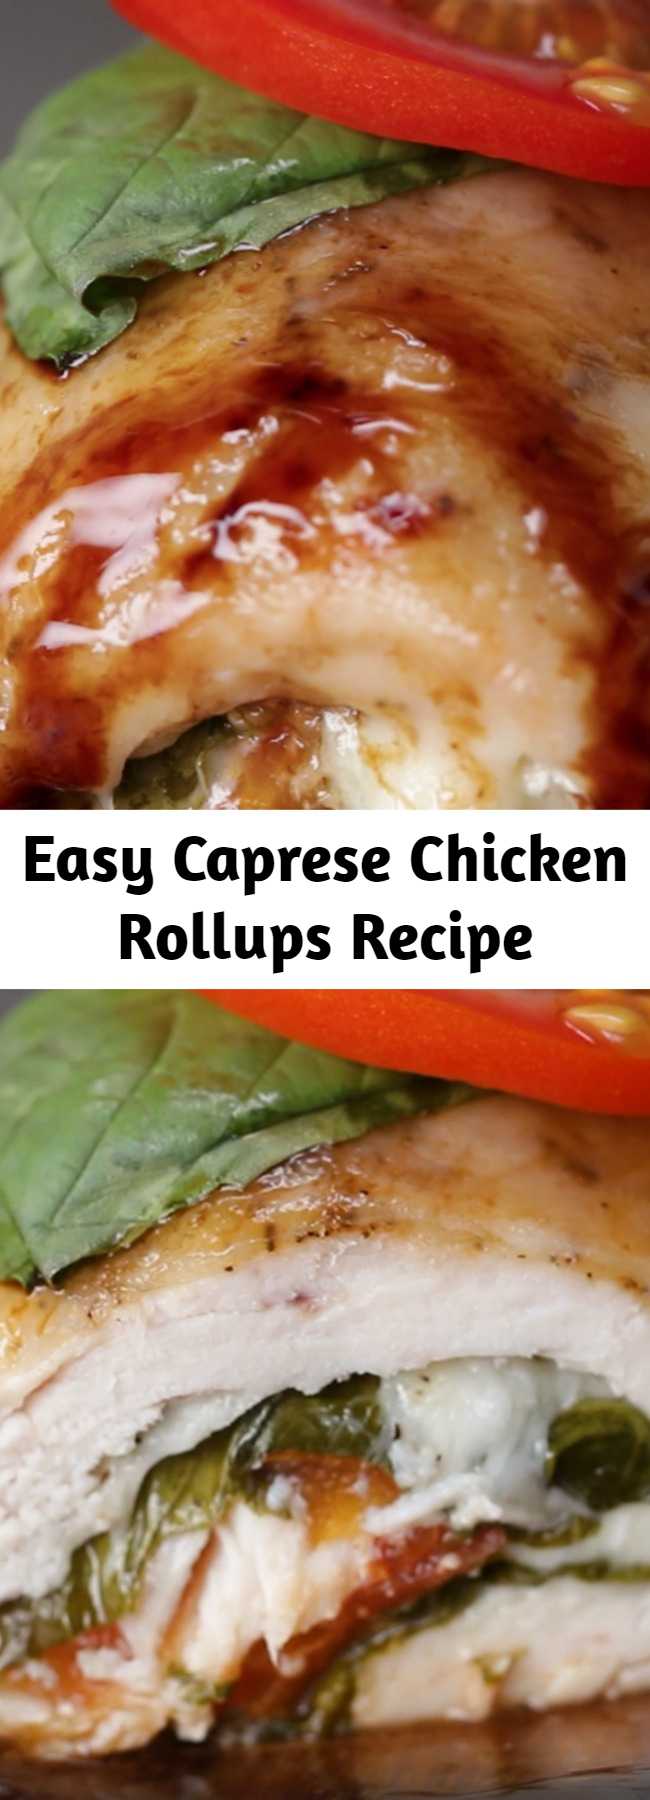 Easy Caprese Chicken Rollups Recipe - Looking for a new way to enjoy caprese salad? Try these Caprese Chicken Rollups! You get all the fun of a caprese salad stuffed into chicken breast! It was really good!